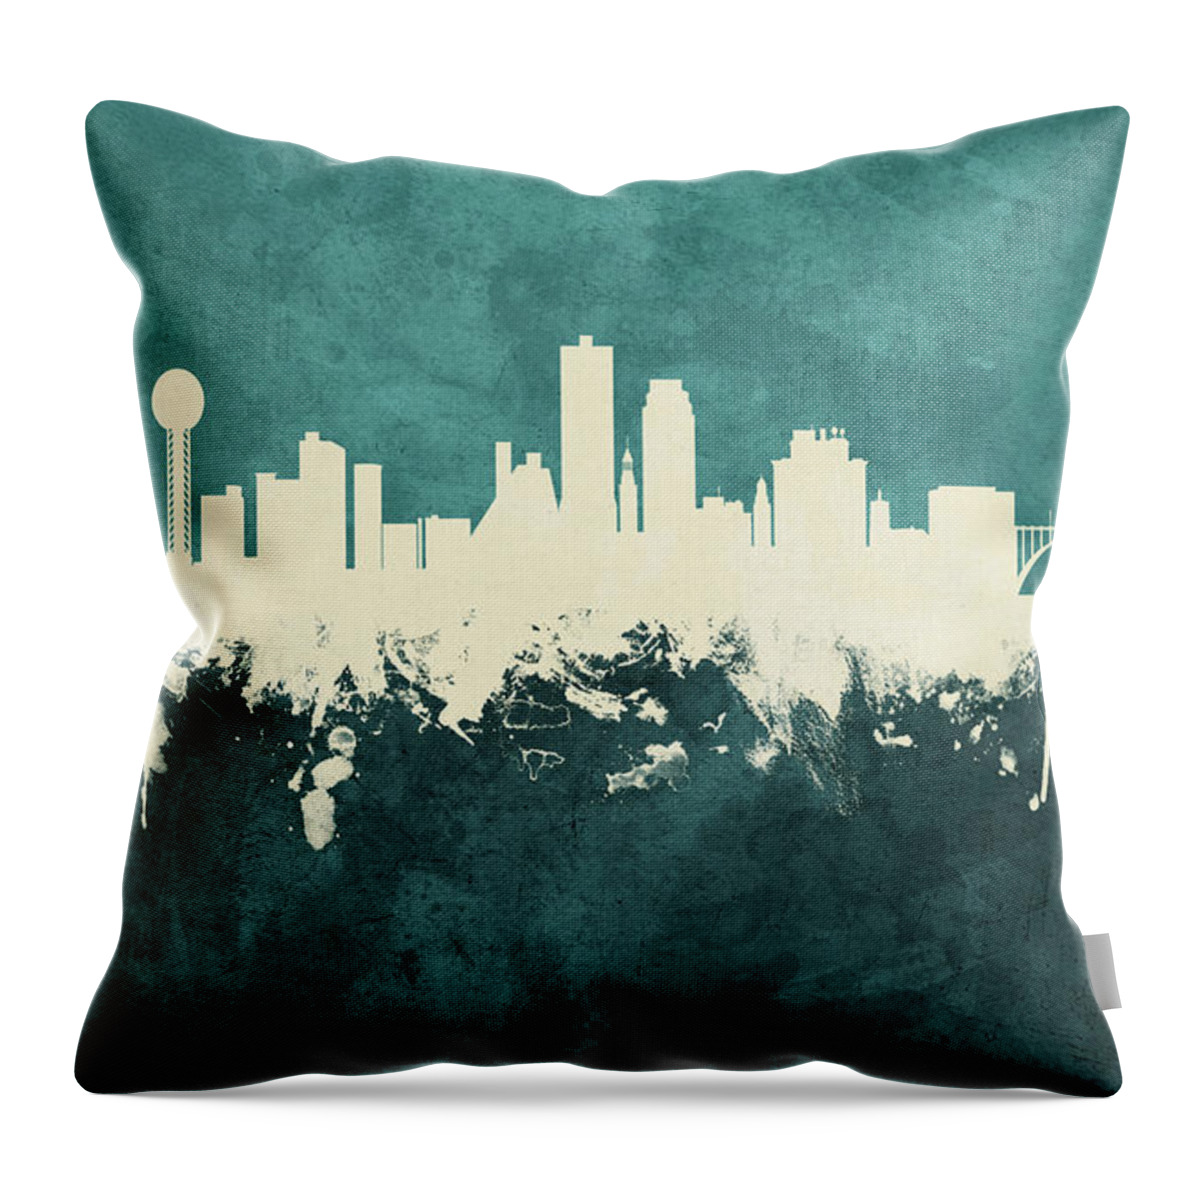 Knoxville Throw Pillow featuring the digital art Knoxville Tennessee Skyline #21 by Michael Tompsett